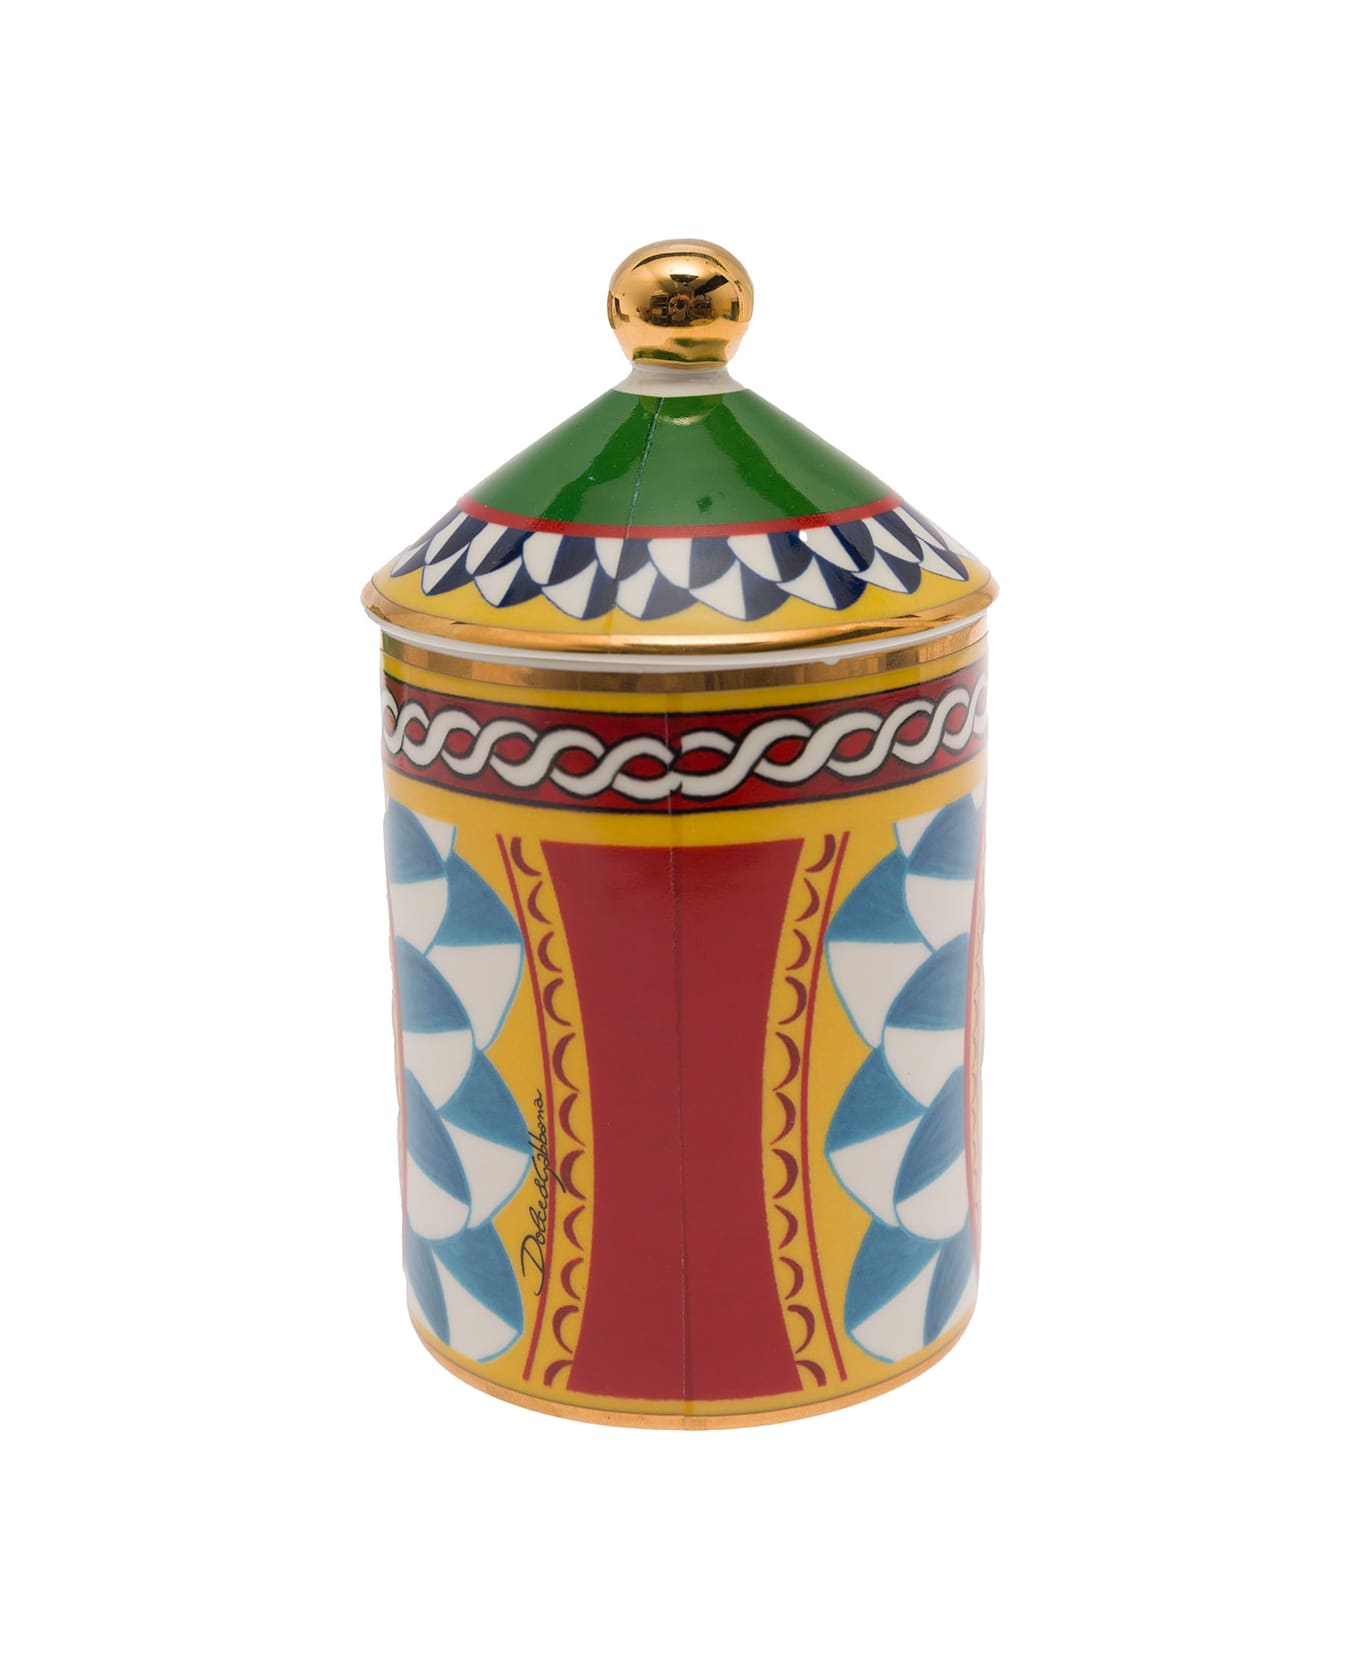 Dolce & Gabbana Wild Jasmine Scented Candle With Lid And Carretto Print - Multicolor インテリア雑貨